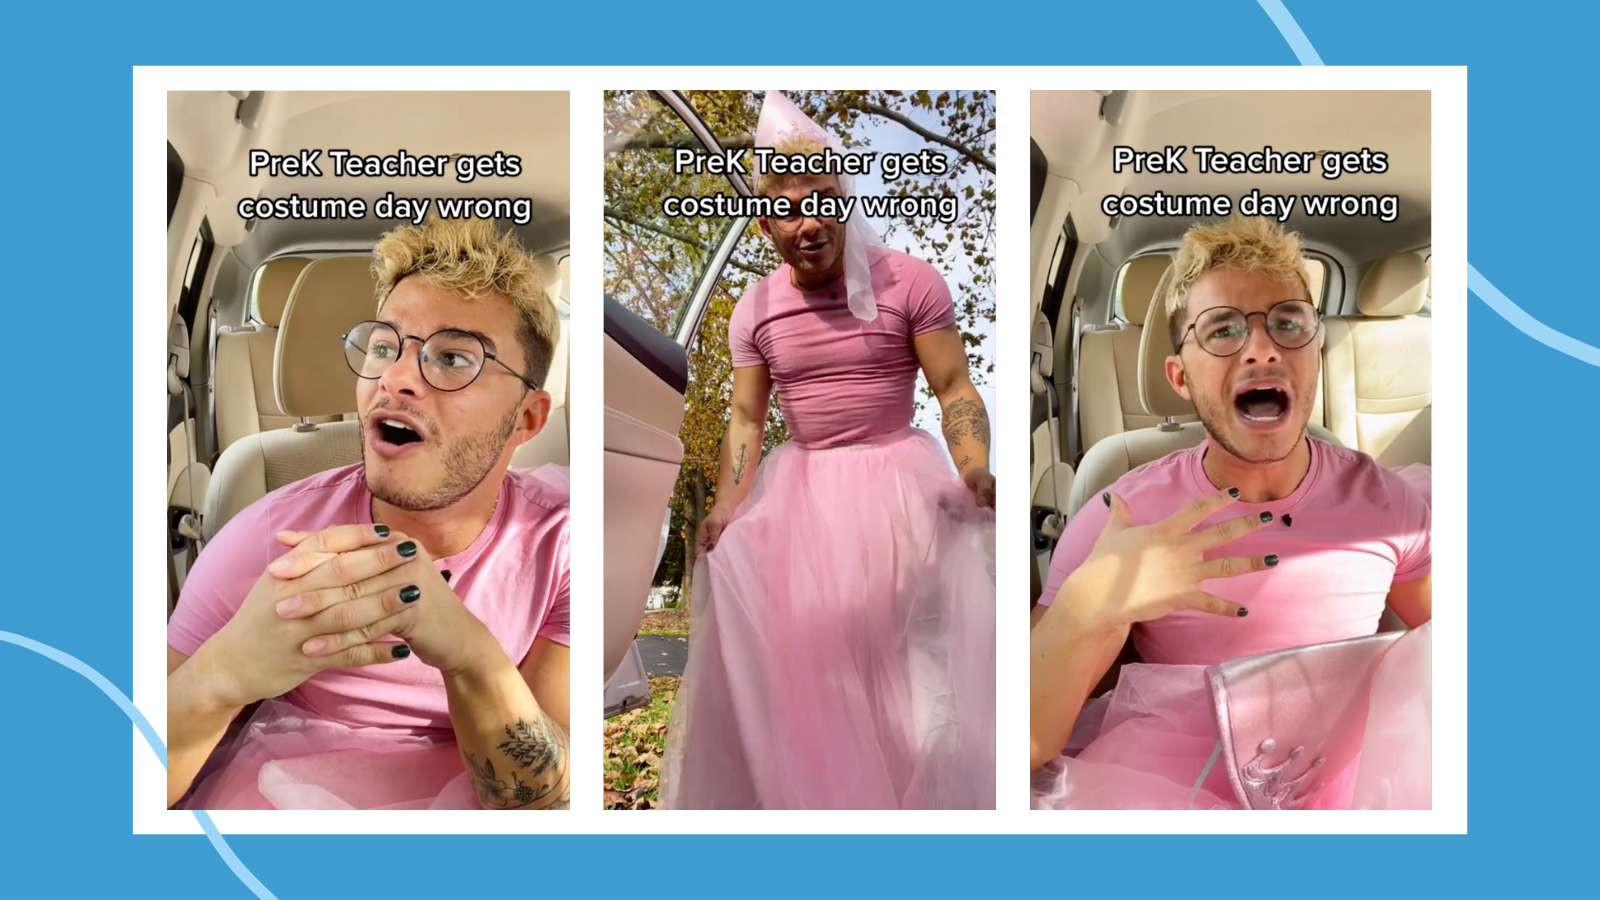 Still images from TikTok of teacher who dressed up on the wrong day